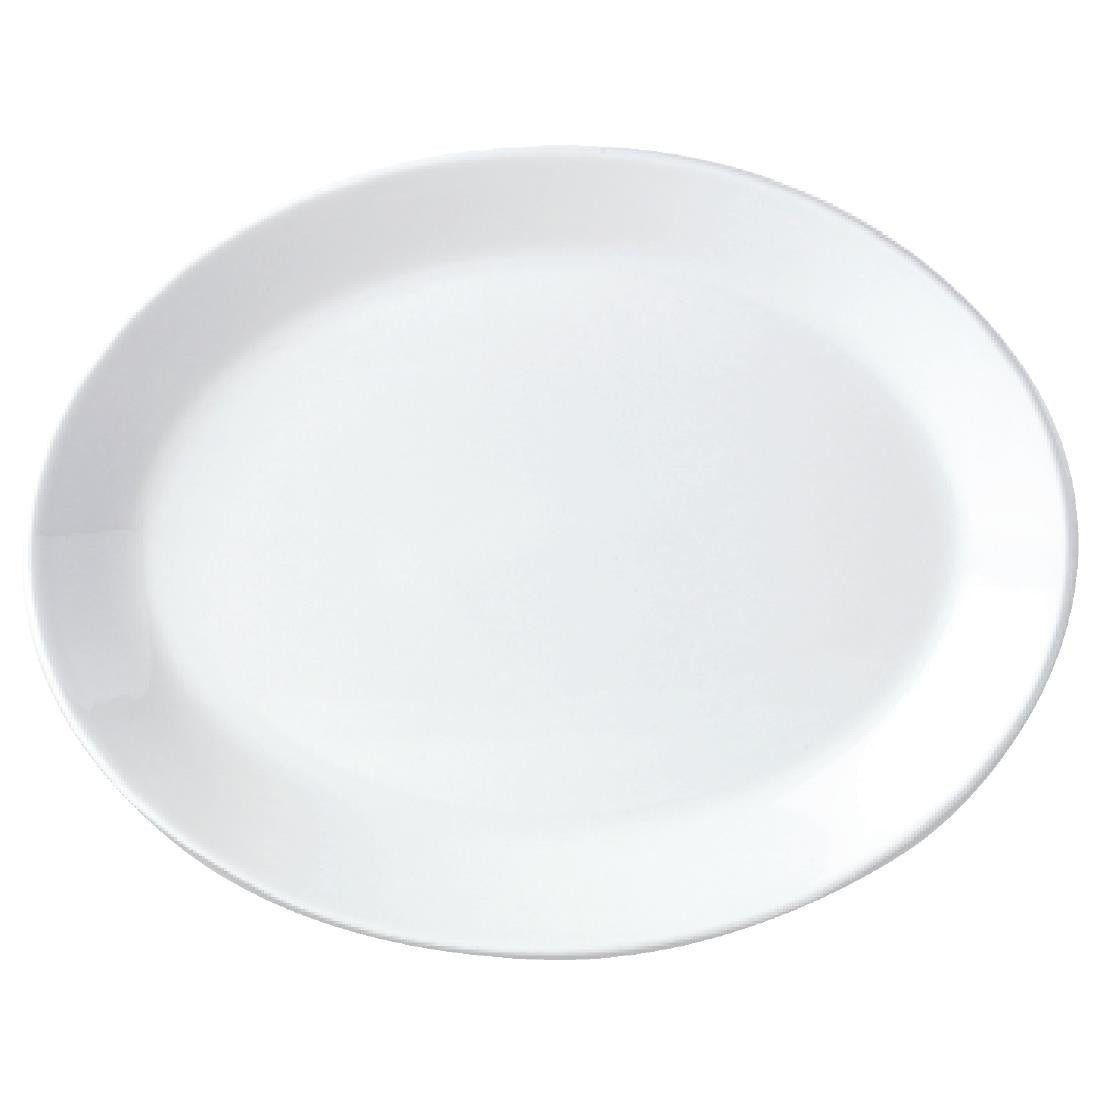 Steelite Simplicity White Oval Coupe Dishes 255mm (Pack of 12)